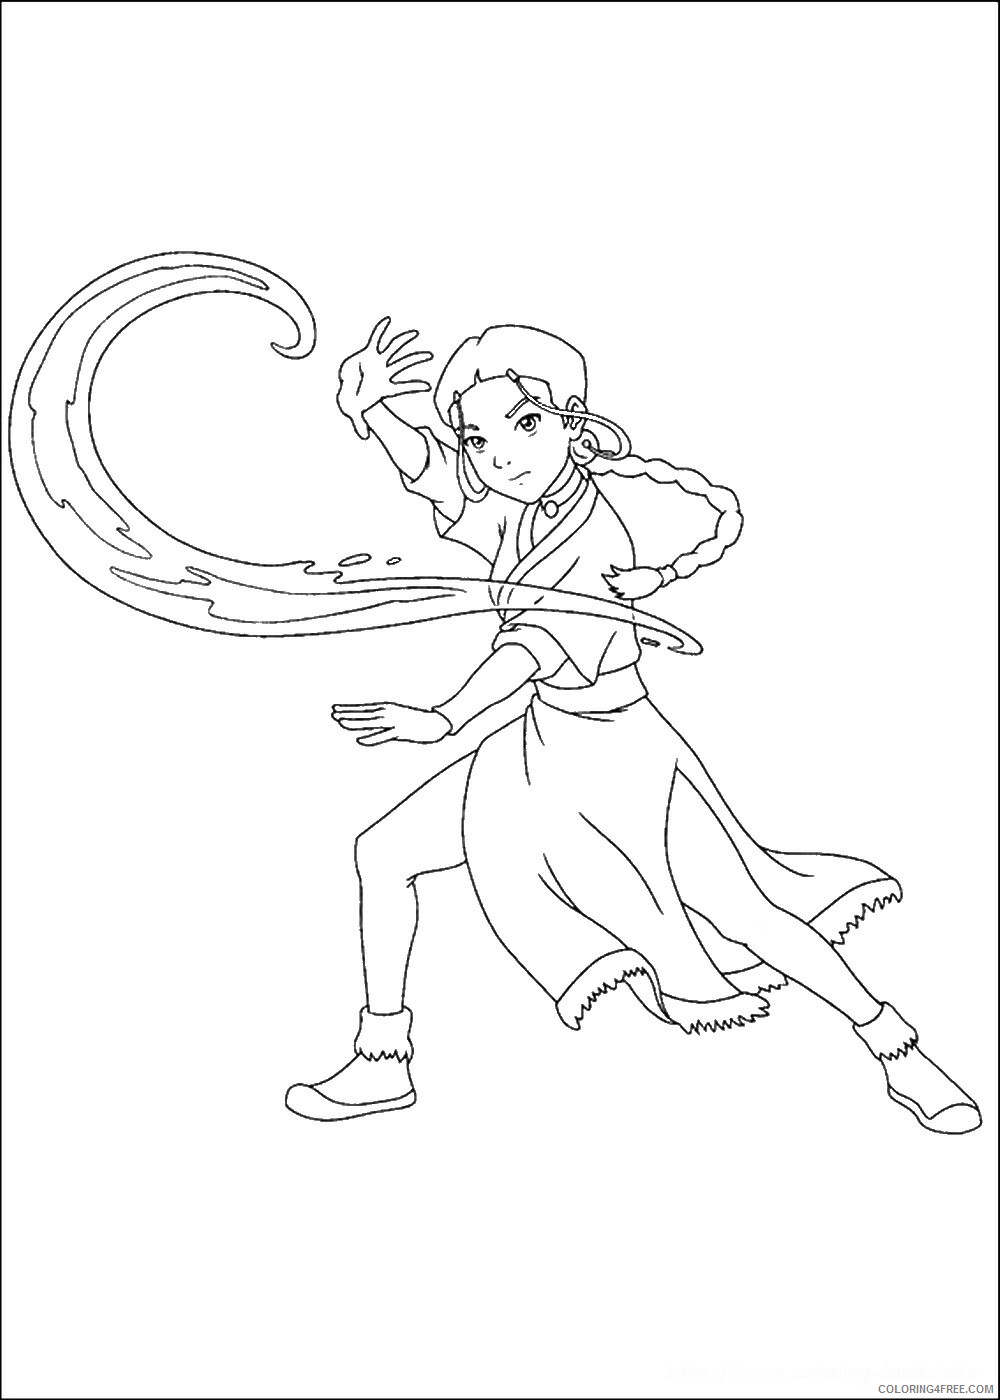 Avatar the Last Airbender Coloring Pages TV Film avatar_cl137 Printable 2020 00295 Coloring4free